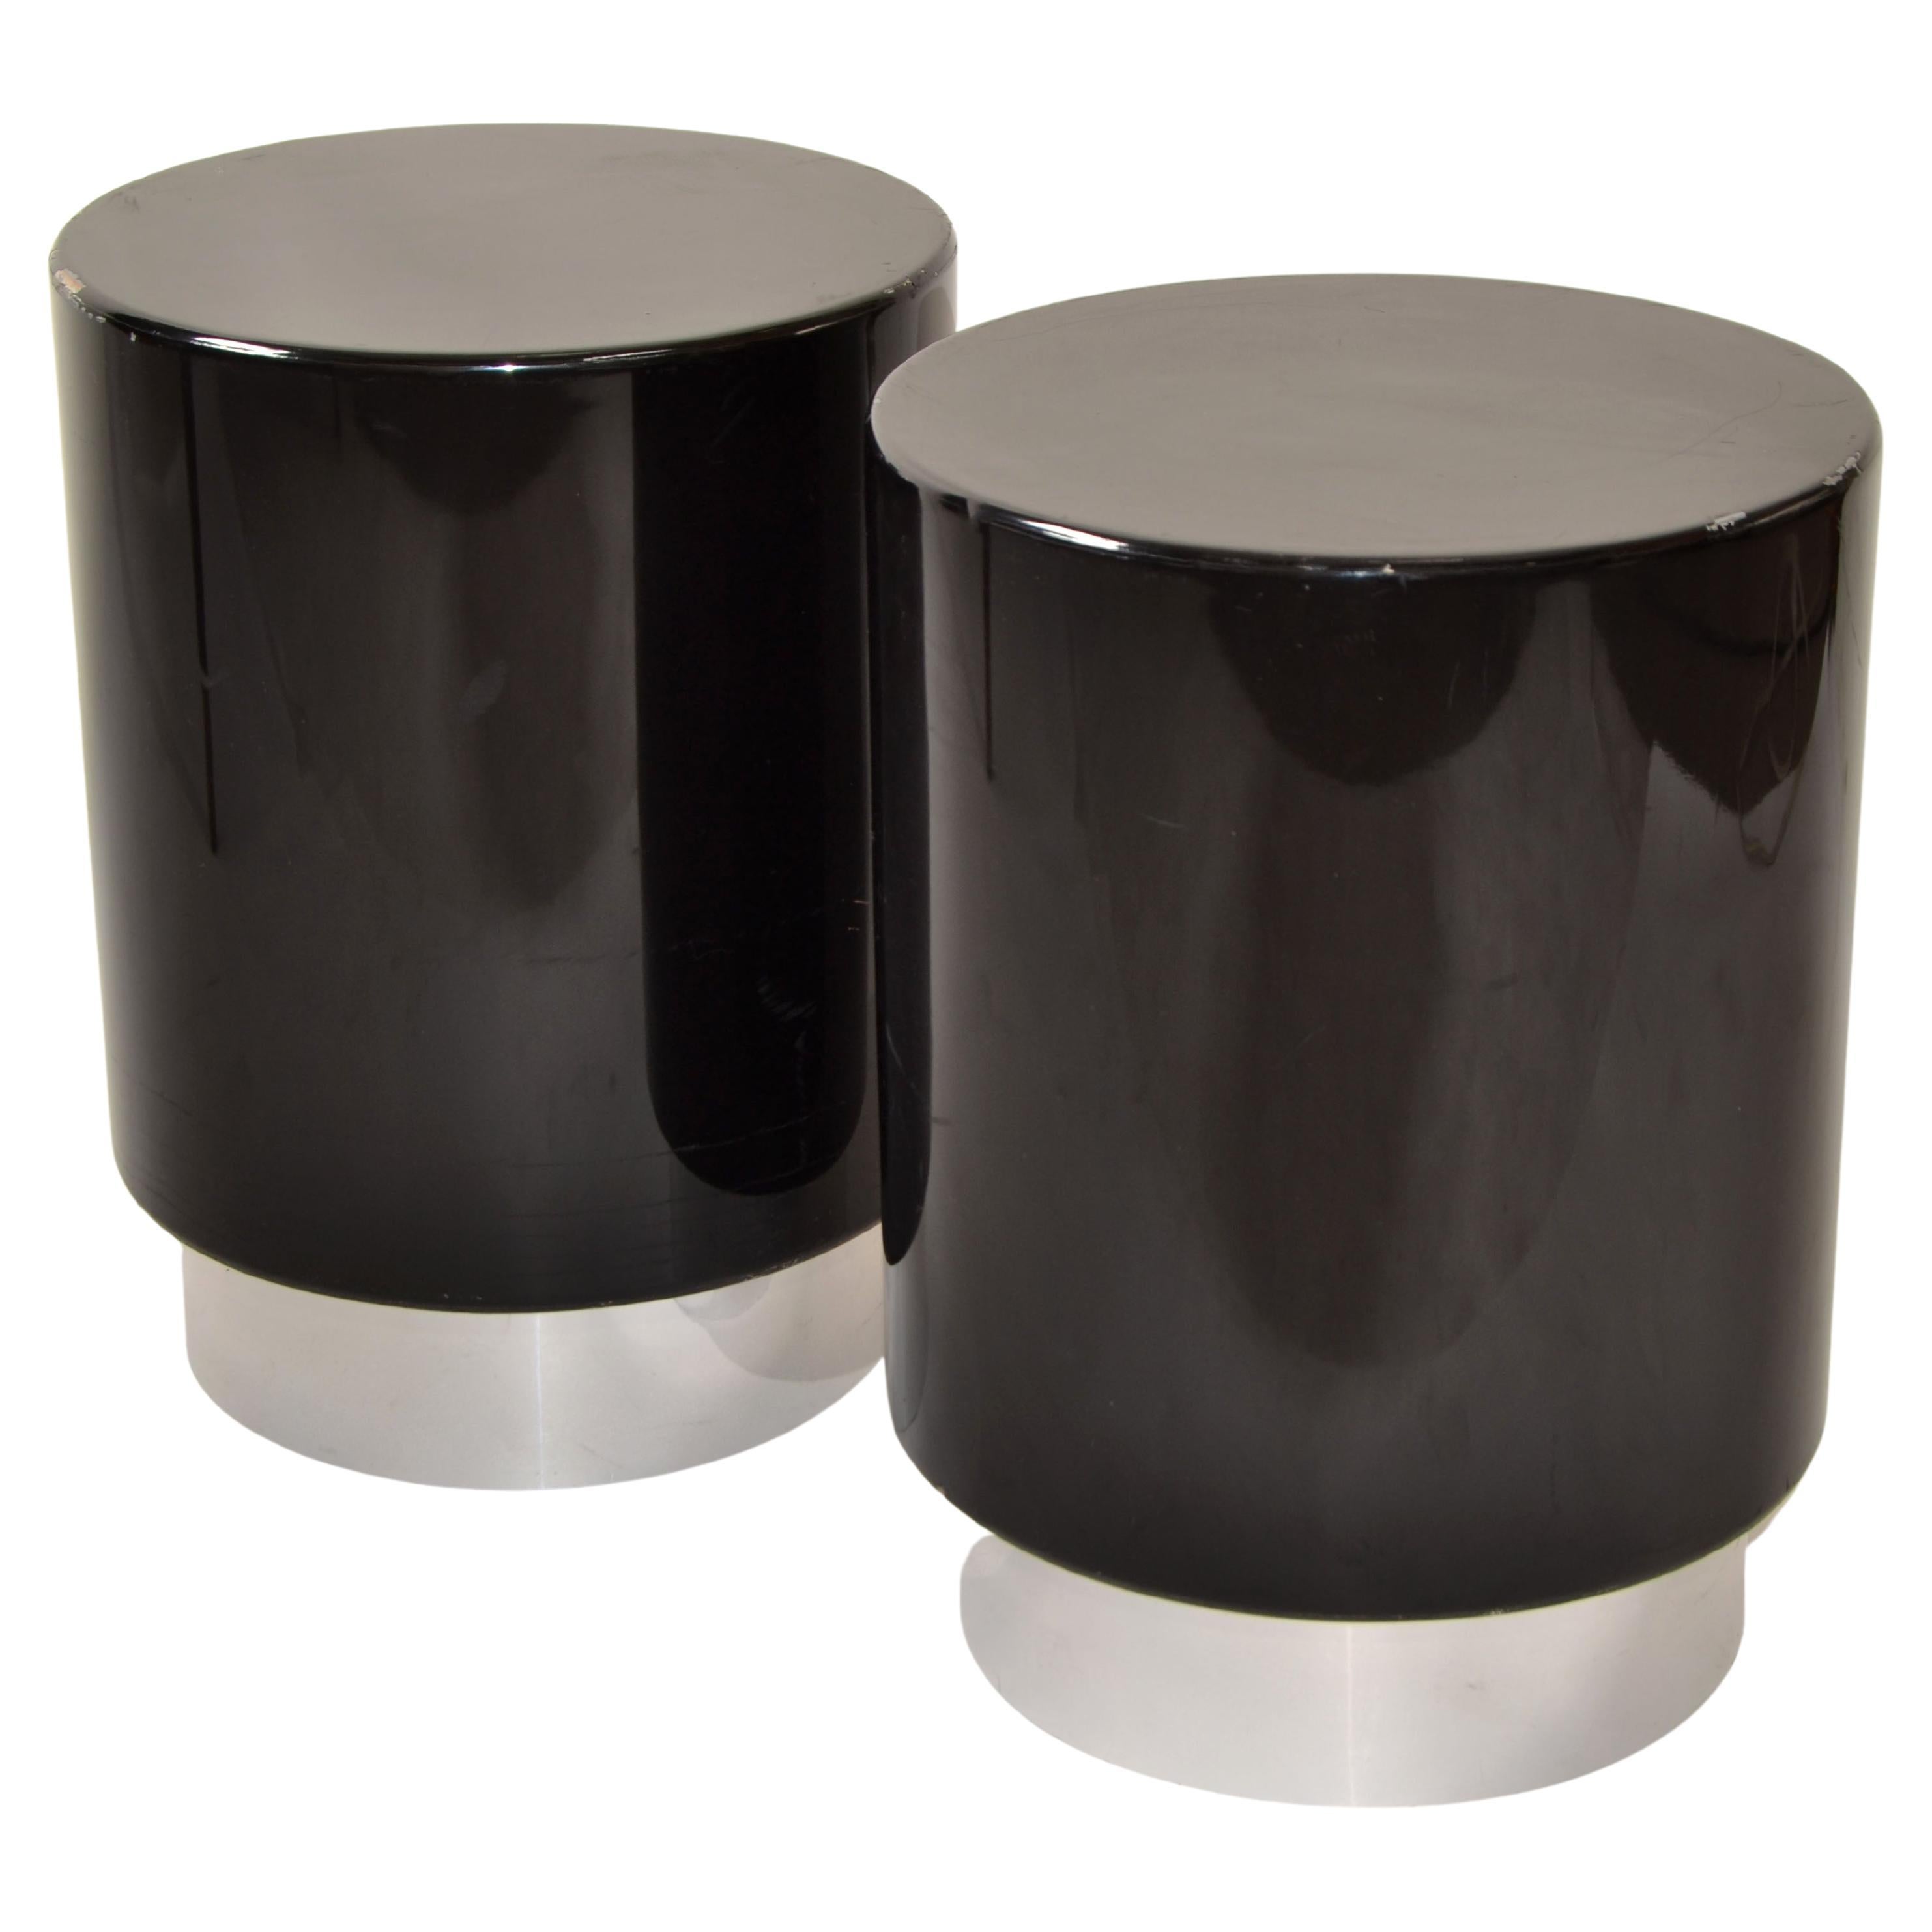 Pair of Mid-Century Modern cylinder-shaped drink drum tables, sofa tables, end tables in the Style of Willy Rizzo.
Made out of Formica over wood in black gloss finish with chrome base.
In refinished condition with some normal wear to the chrome